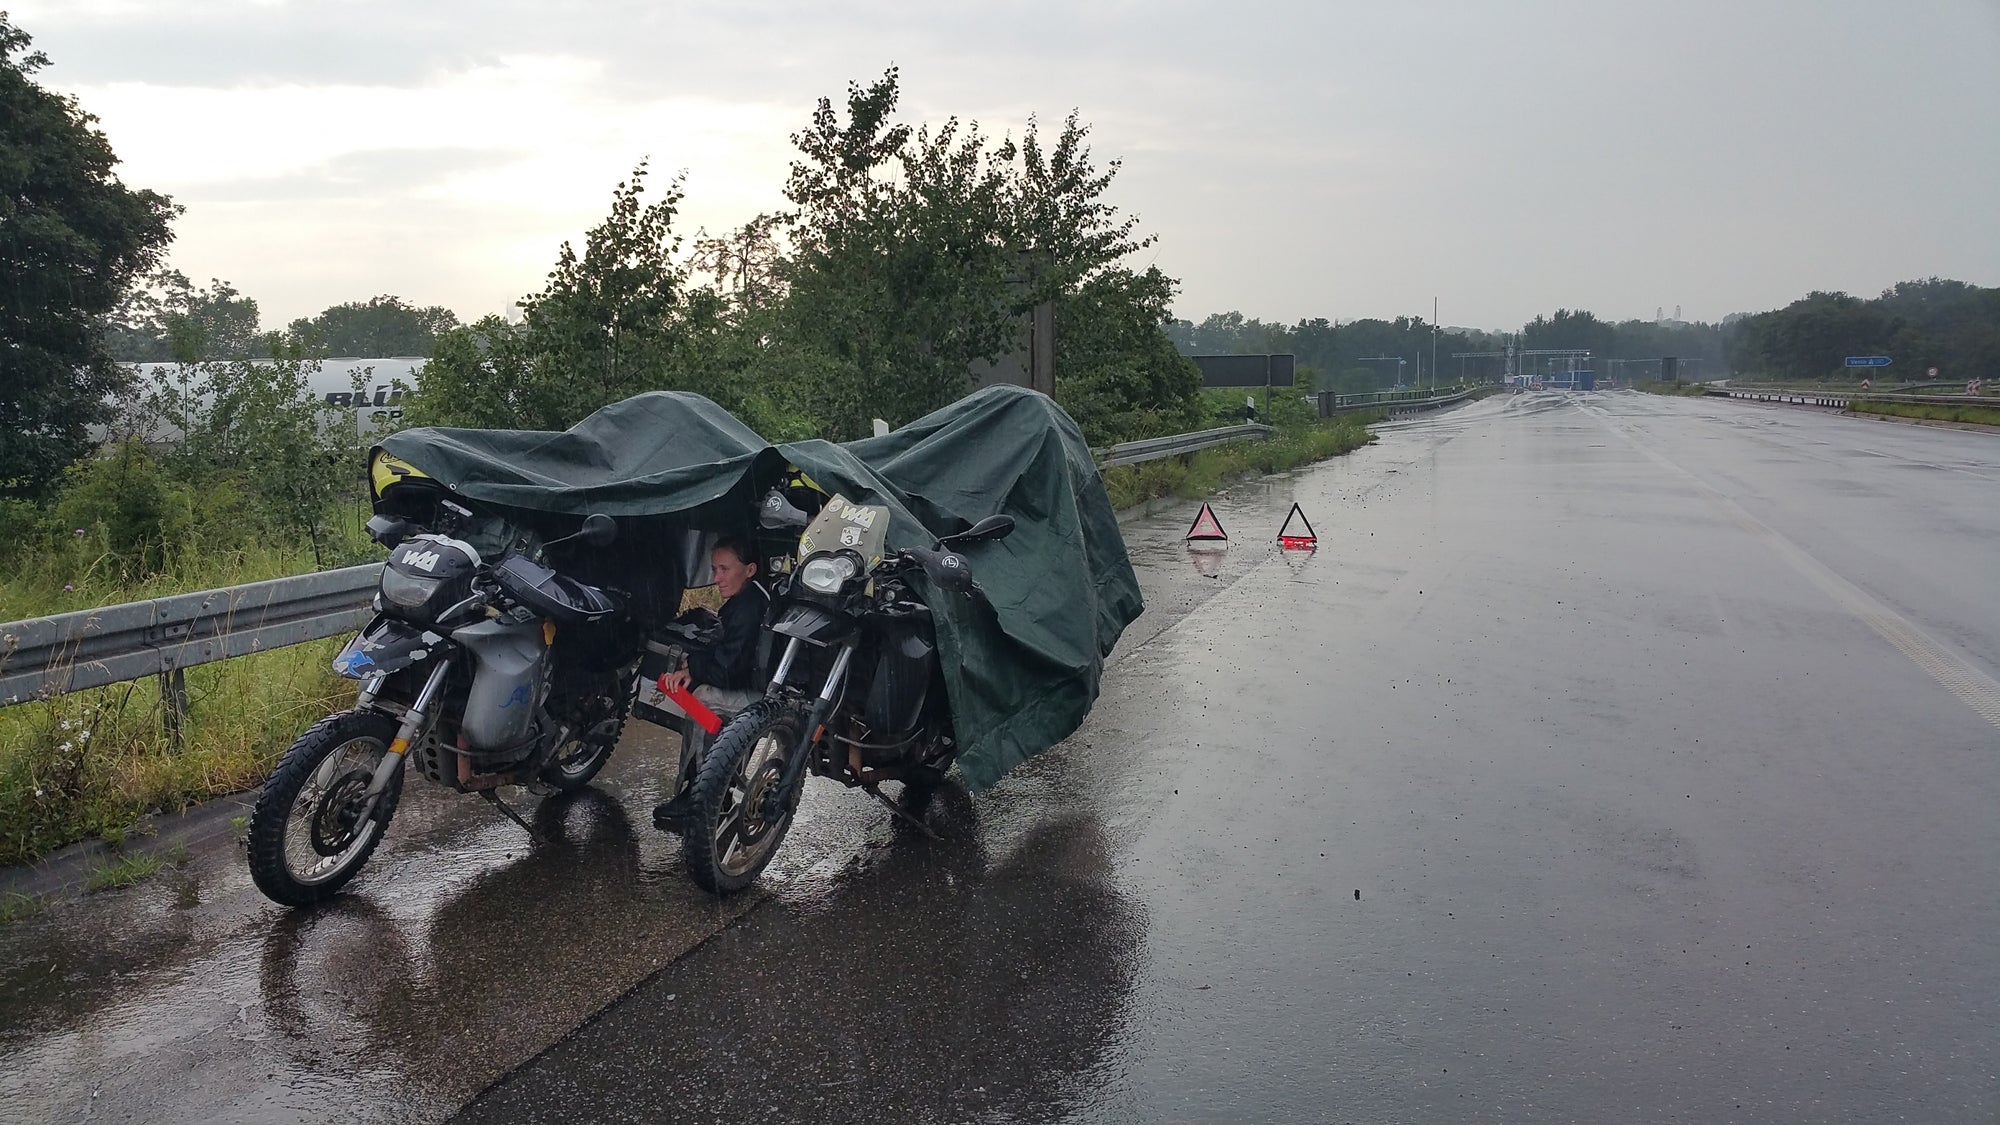 The Pack Track broke down in Germany in the rain. Huddled under the tarpaulin slung over the motorbikes waiting for roadside assistance.